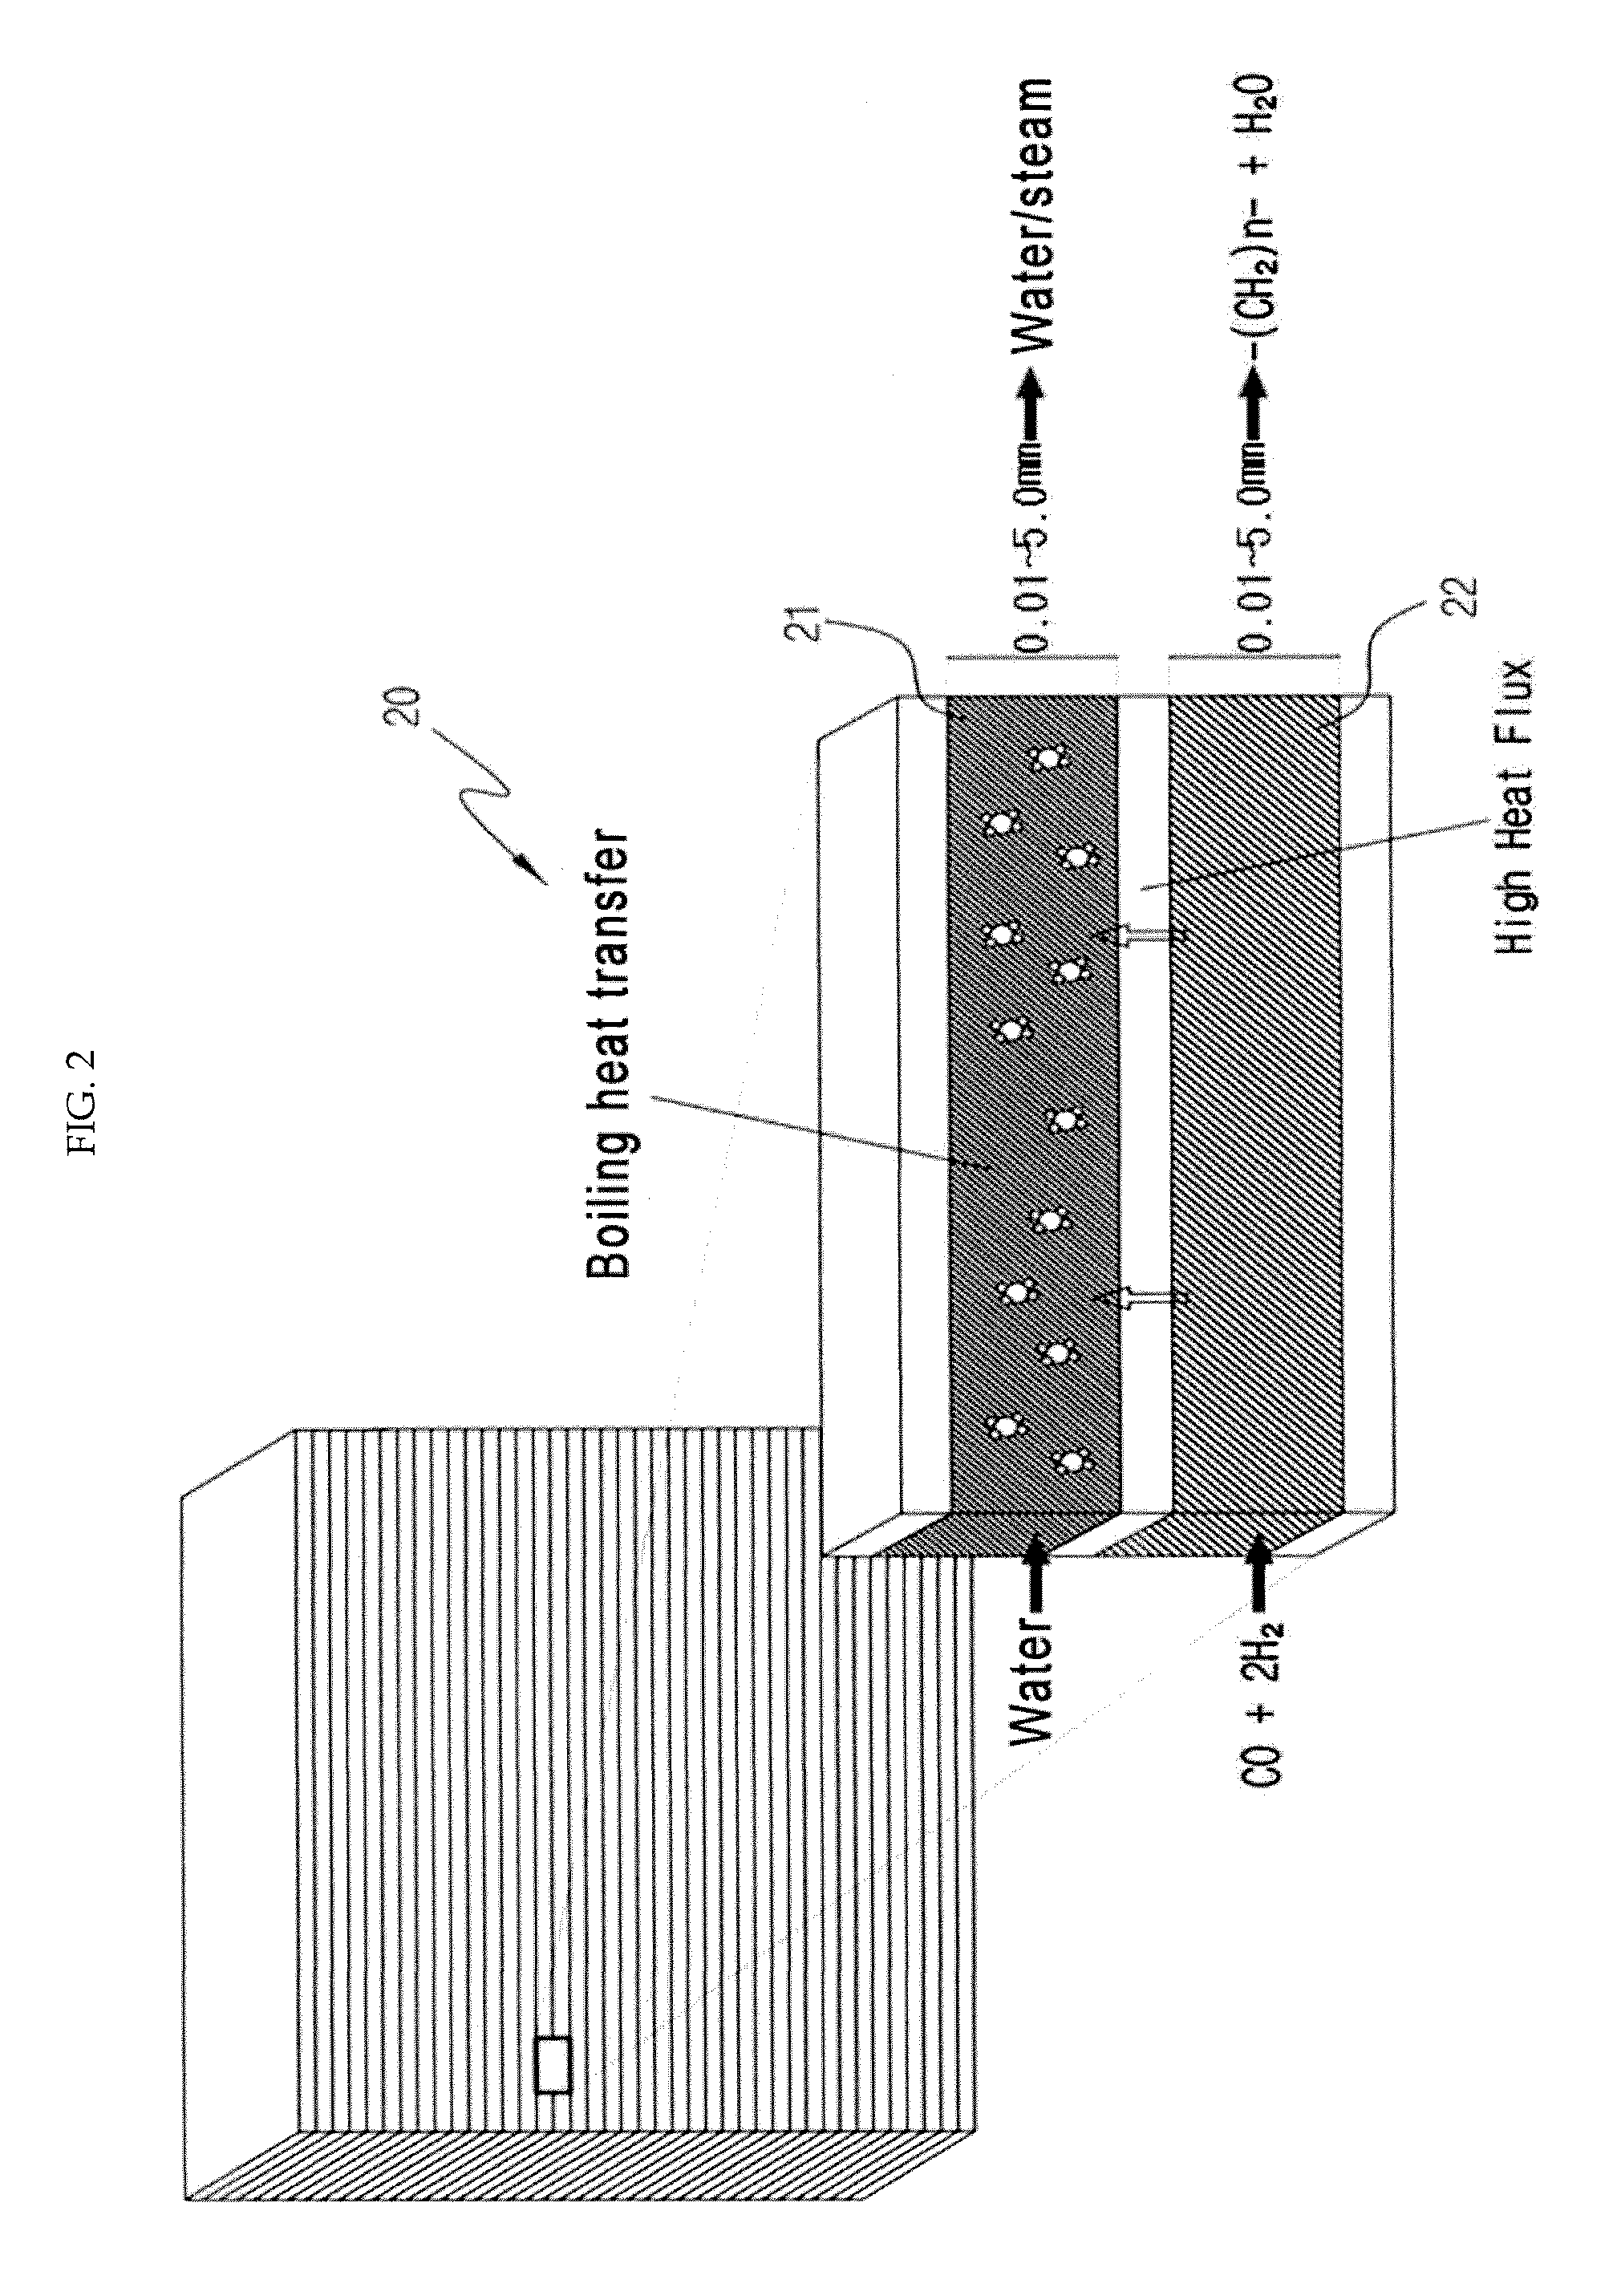 Gtl-fpso system for conversion of associated gas in oil fields and stranded gas in stranded gas fields, and process for production of synthetic fuel using the same